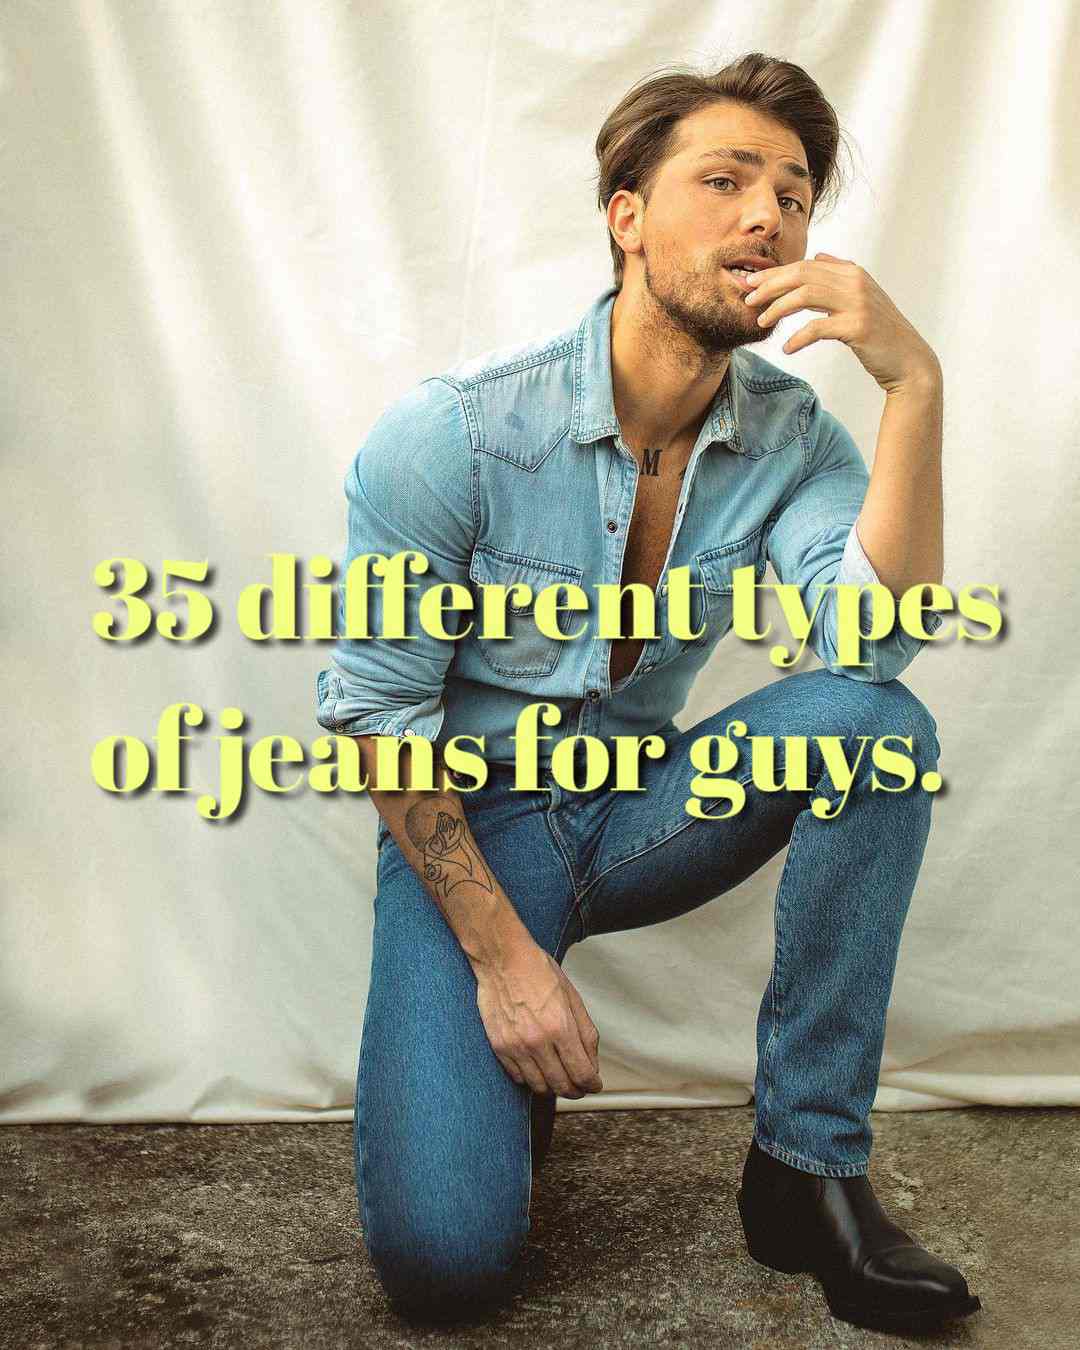 Different types of jeans